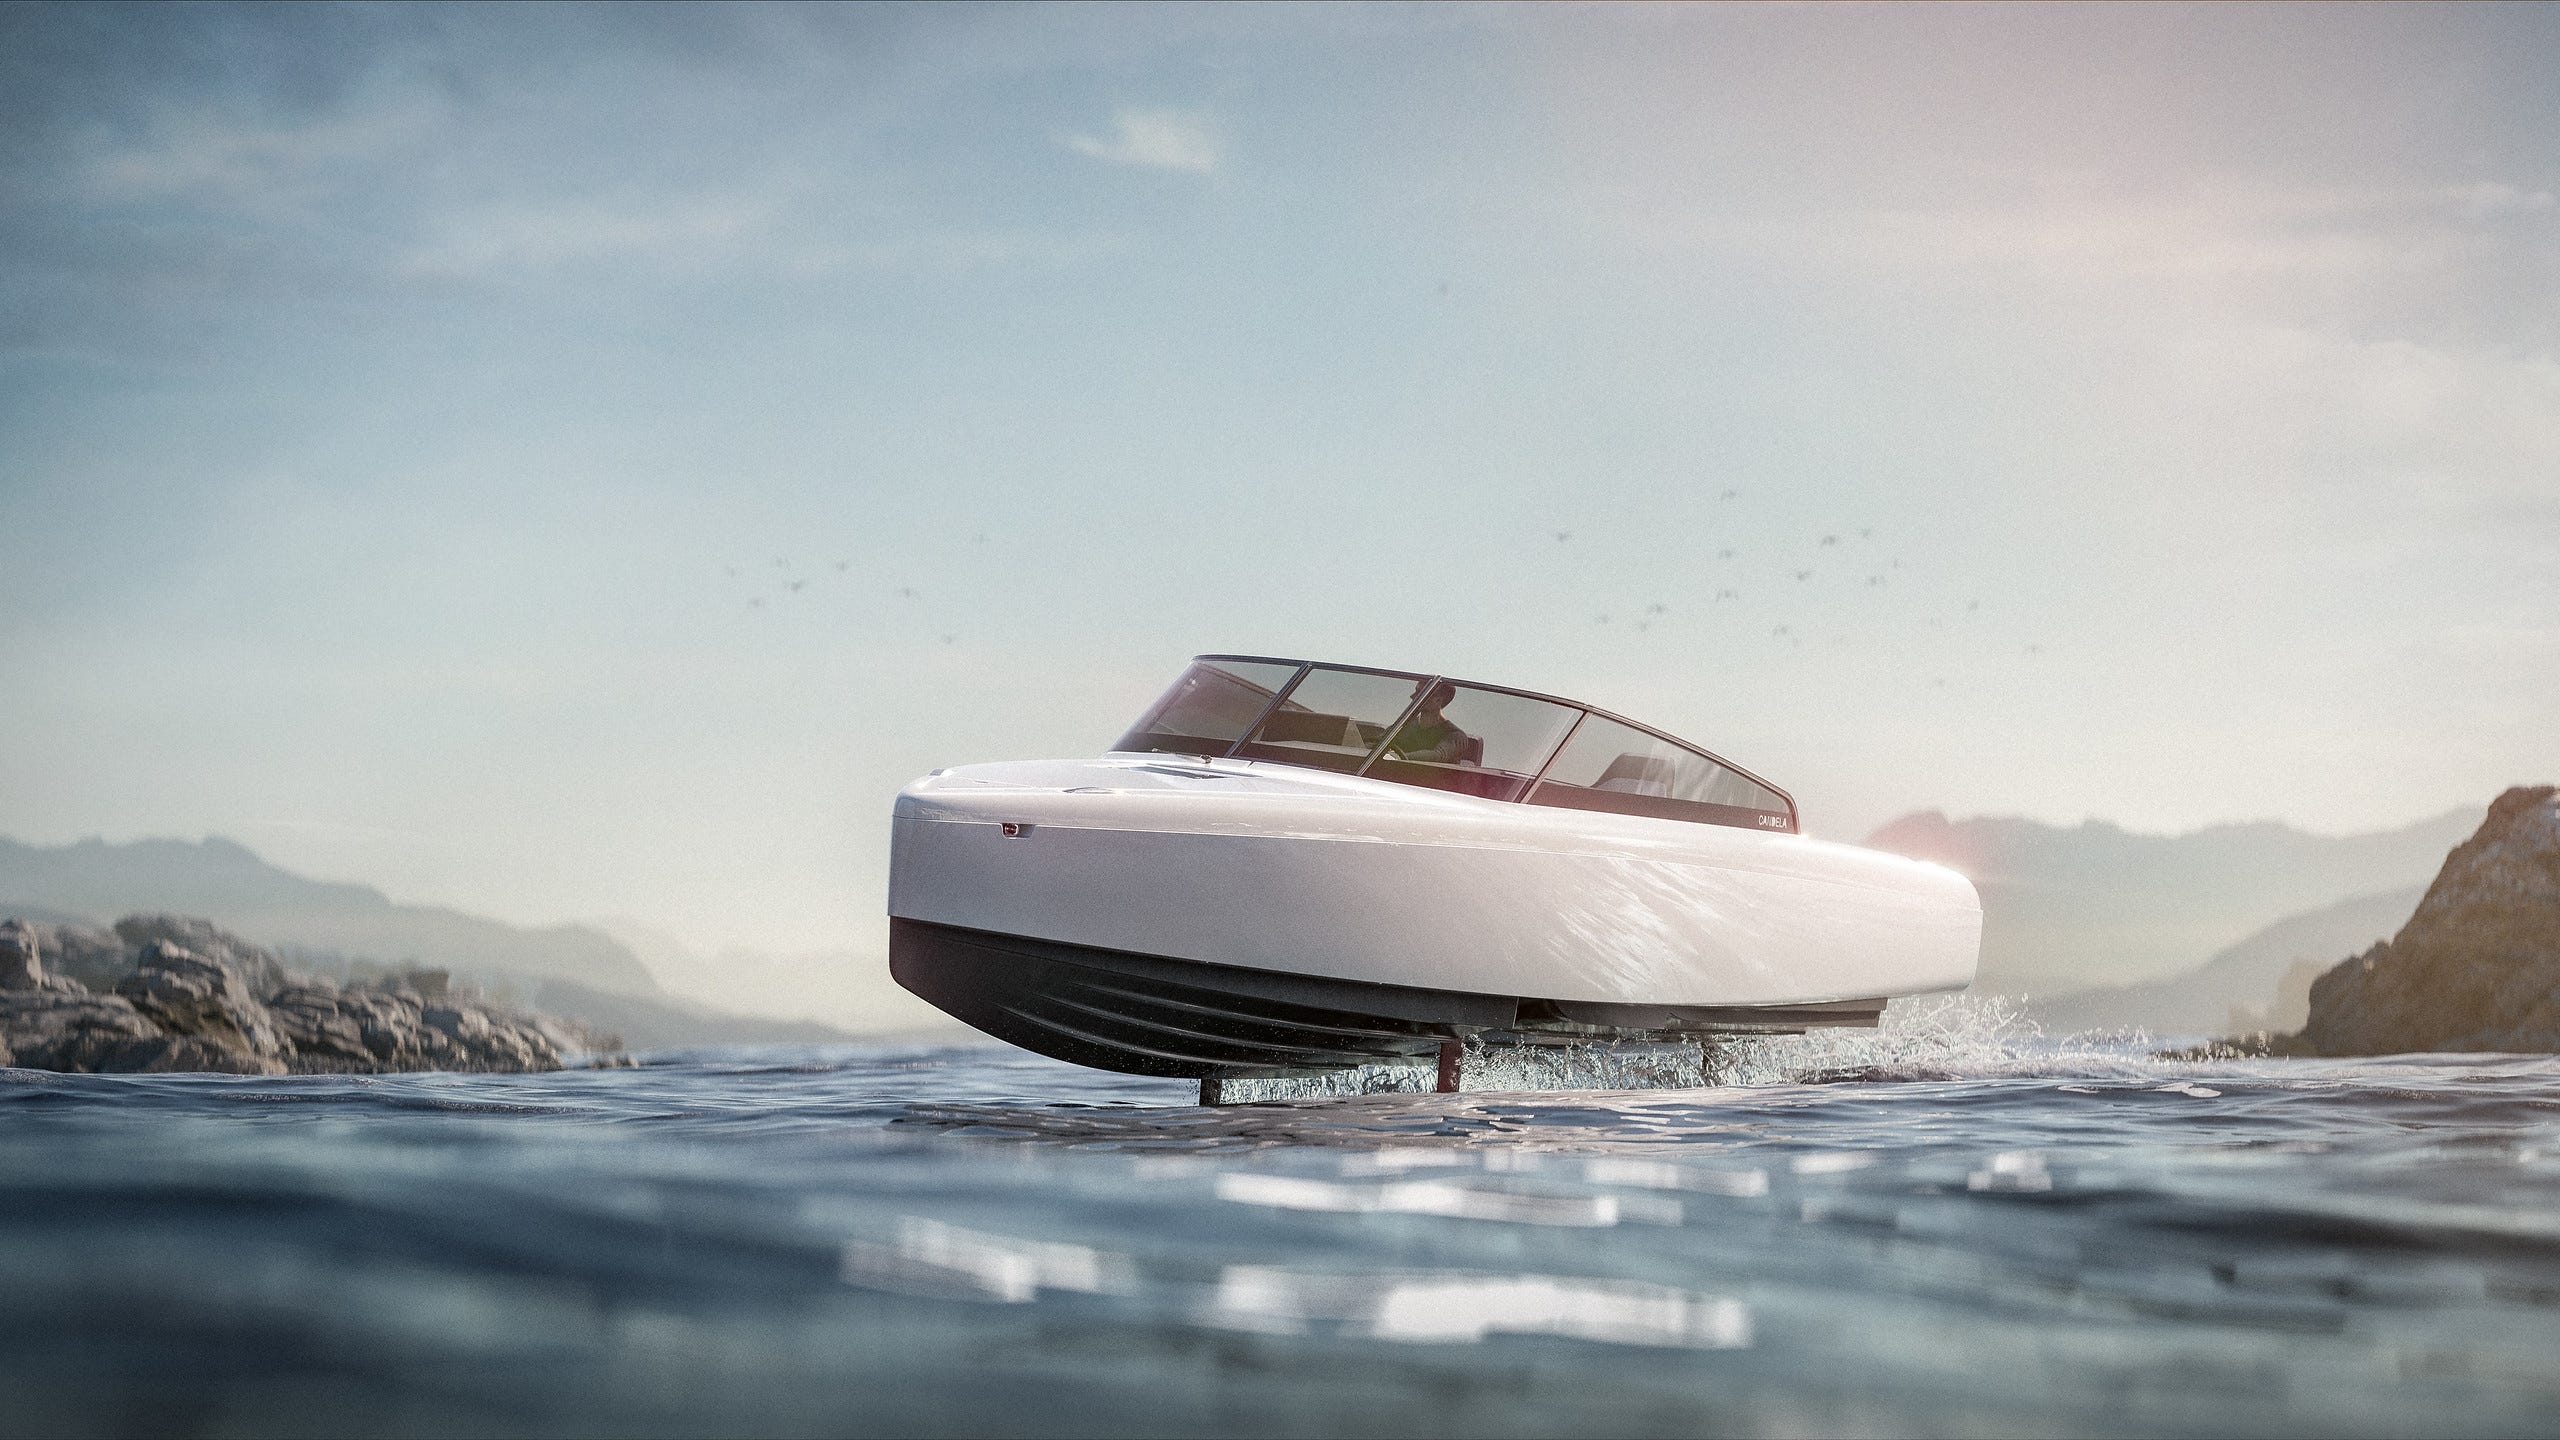 An all-electric hydrofoil boat